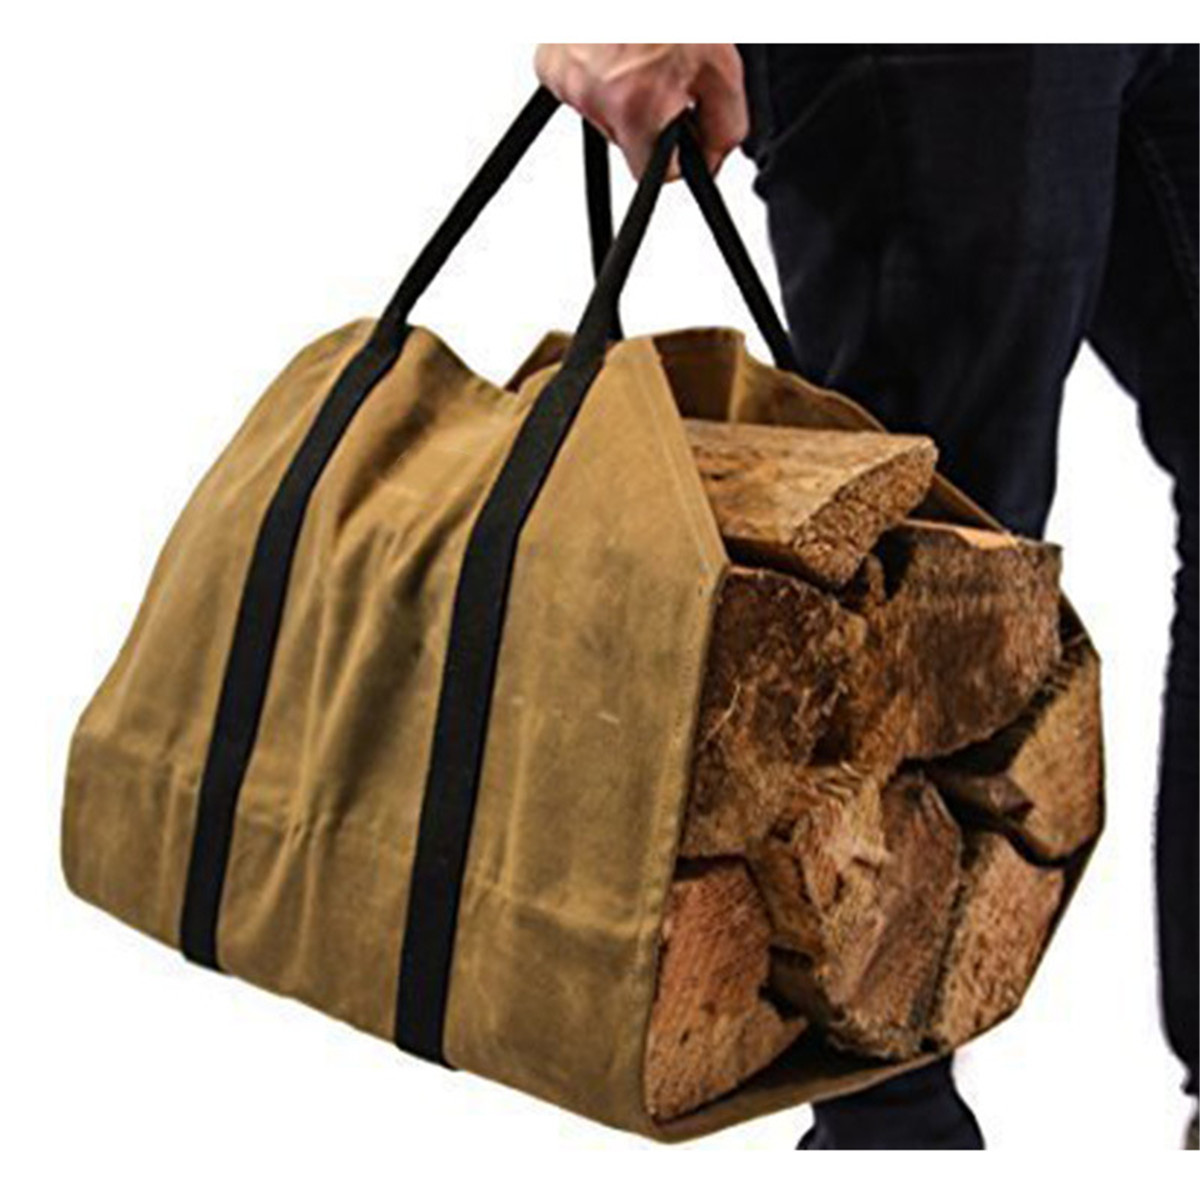 khaki-Firewood-Carrier-Log-Carrier-Wood-Carrying-Bag-for-Fireplace-16oz-Waxed-Canvas-1388831-3